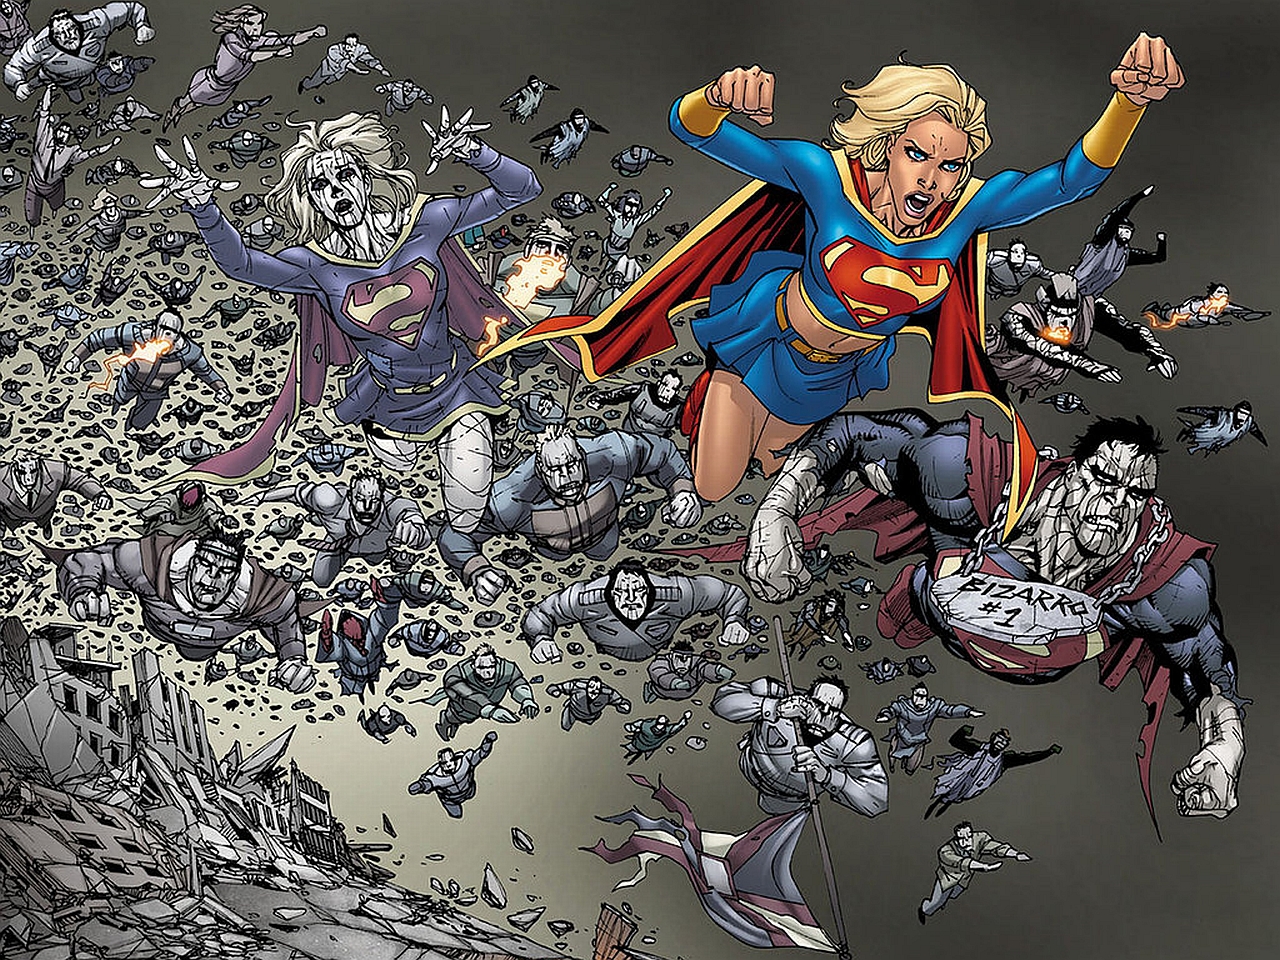 Supergirl Image - ID: 352122 - Image Abyss